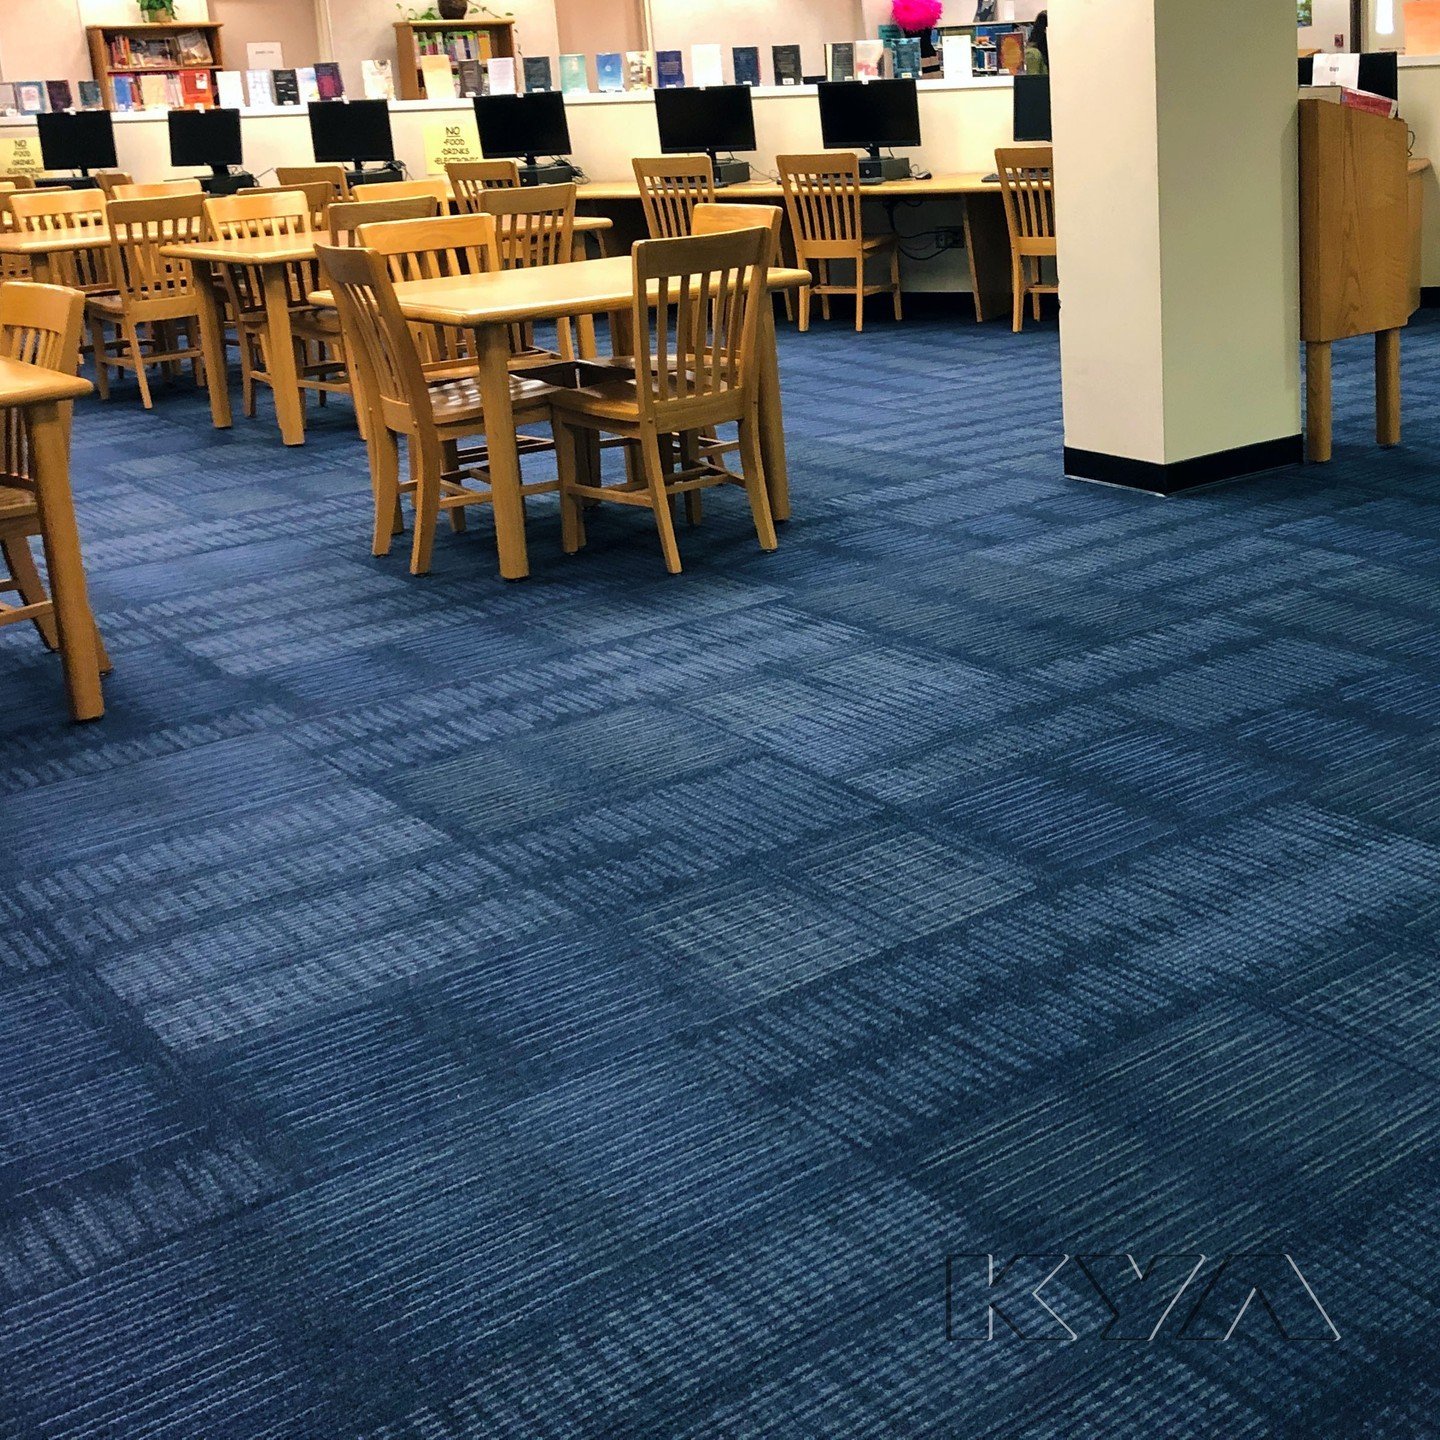 Did you know the coloring of your floors can play a role in how you feel in that environment? The blue flooring here at Alhambra High School promotes a calm and peaceful environment. The more peaceful the environment, the easier it is for students to